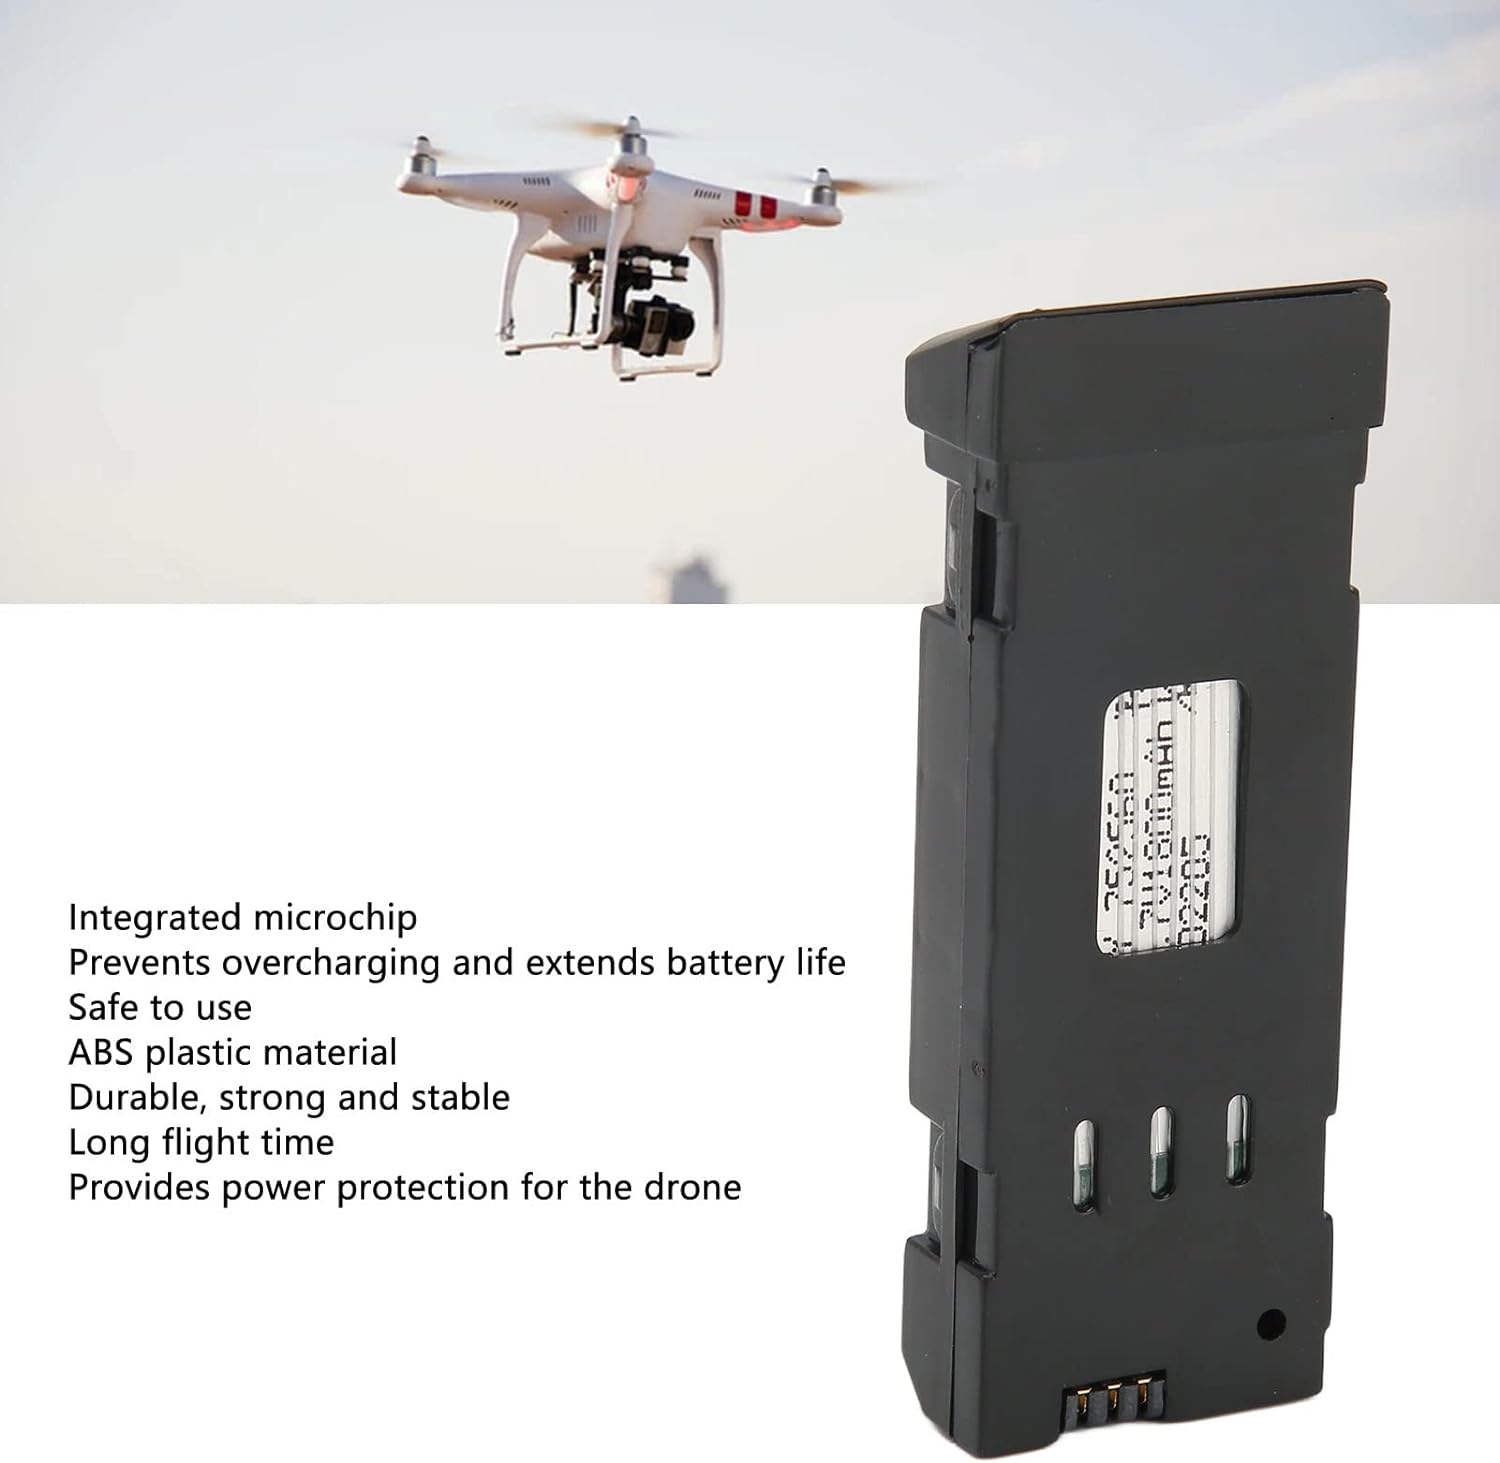 E58 Drone Battery, Integrated microchip Prevents overcharging and extends battery life Safe to use ABS